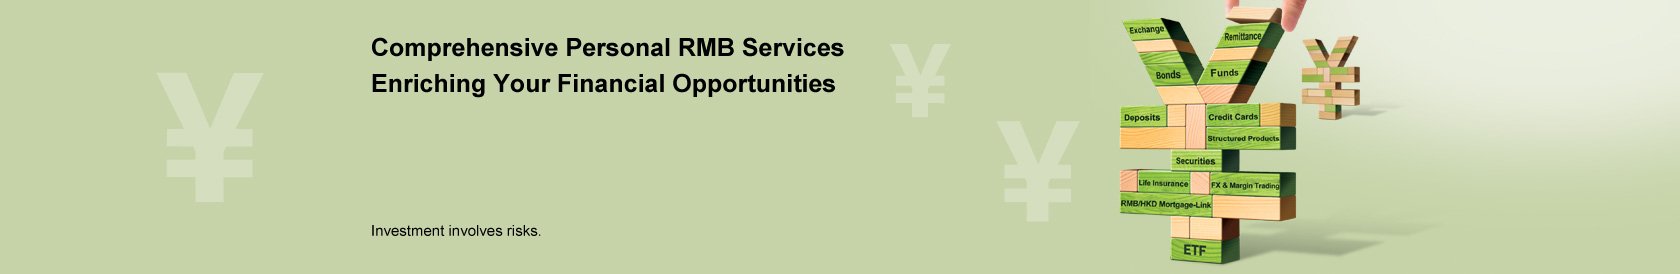 Comprehensive Personal RMB Services Enriching Your Financial Opportunities